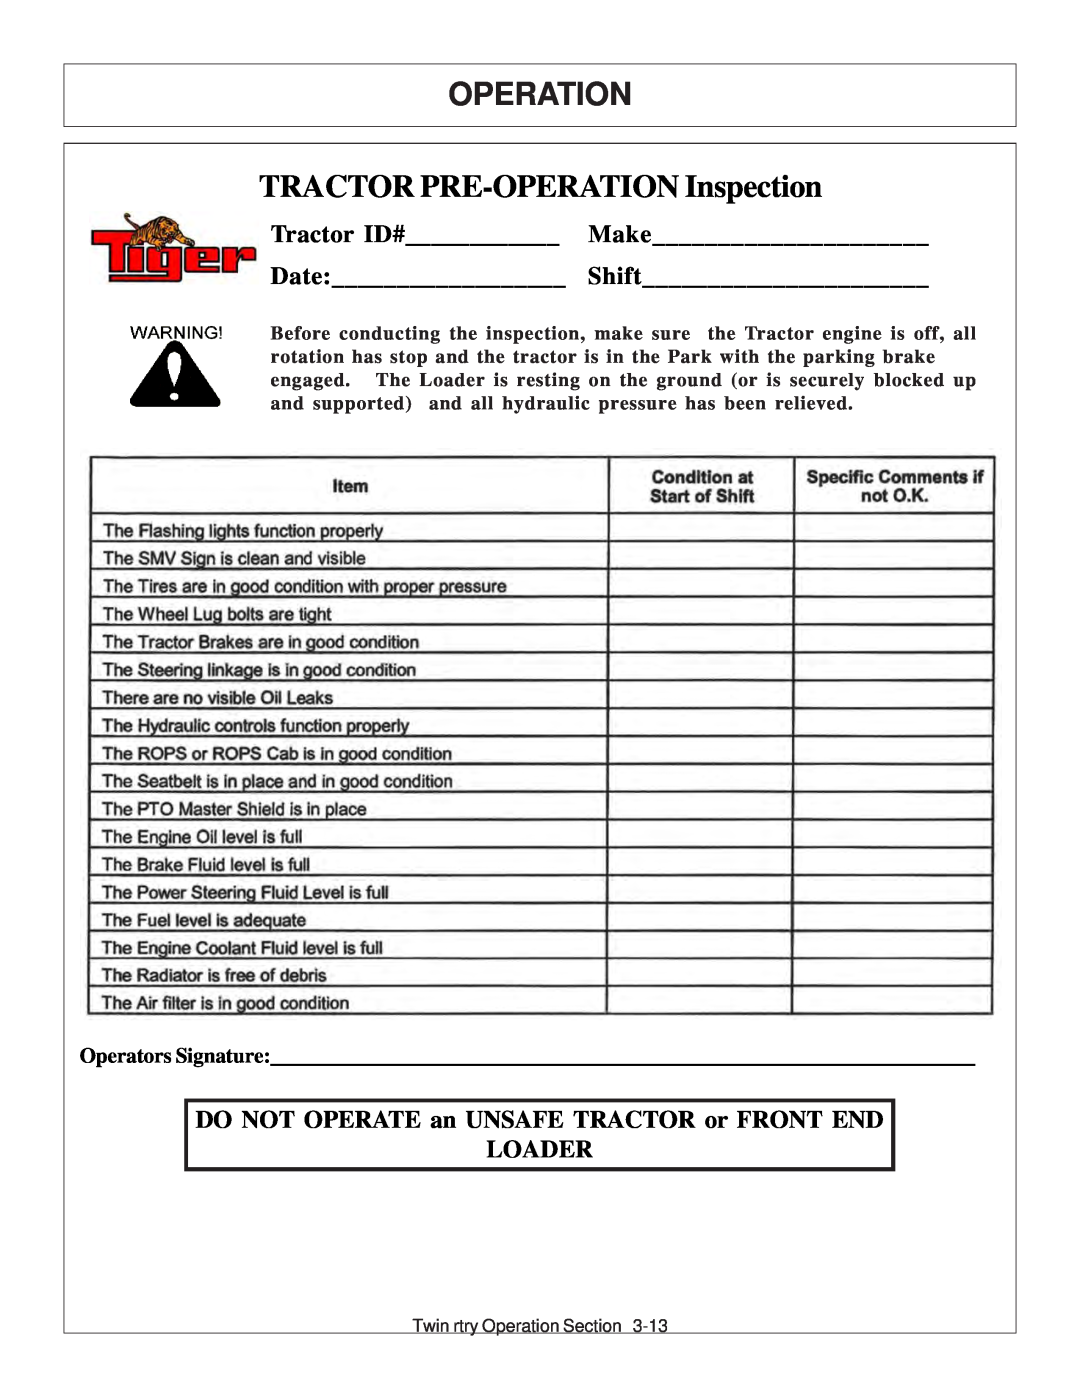 Tiger Products Co., Ltd 6020009 manual Operation, TRACTOR PRE-OPERATION Inspection, Tractor ID# Make Date Shift 